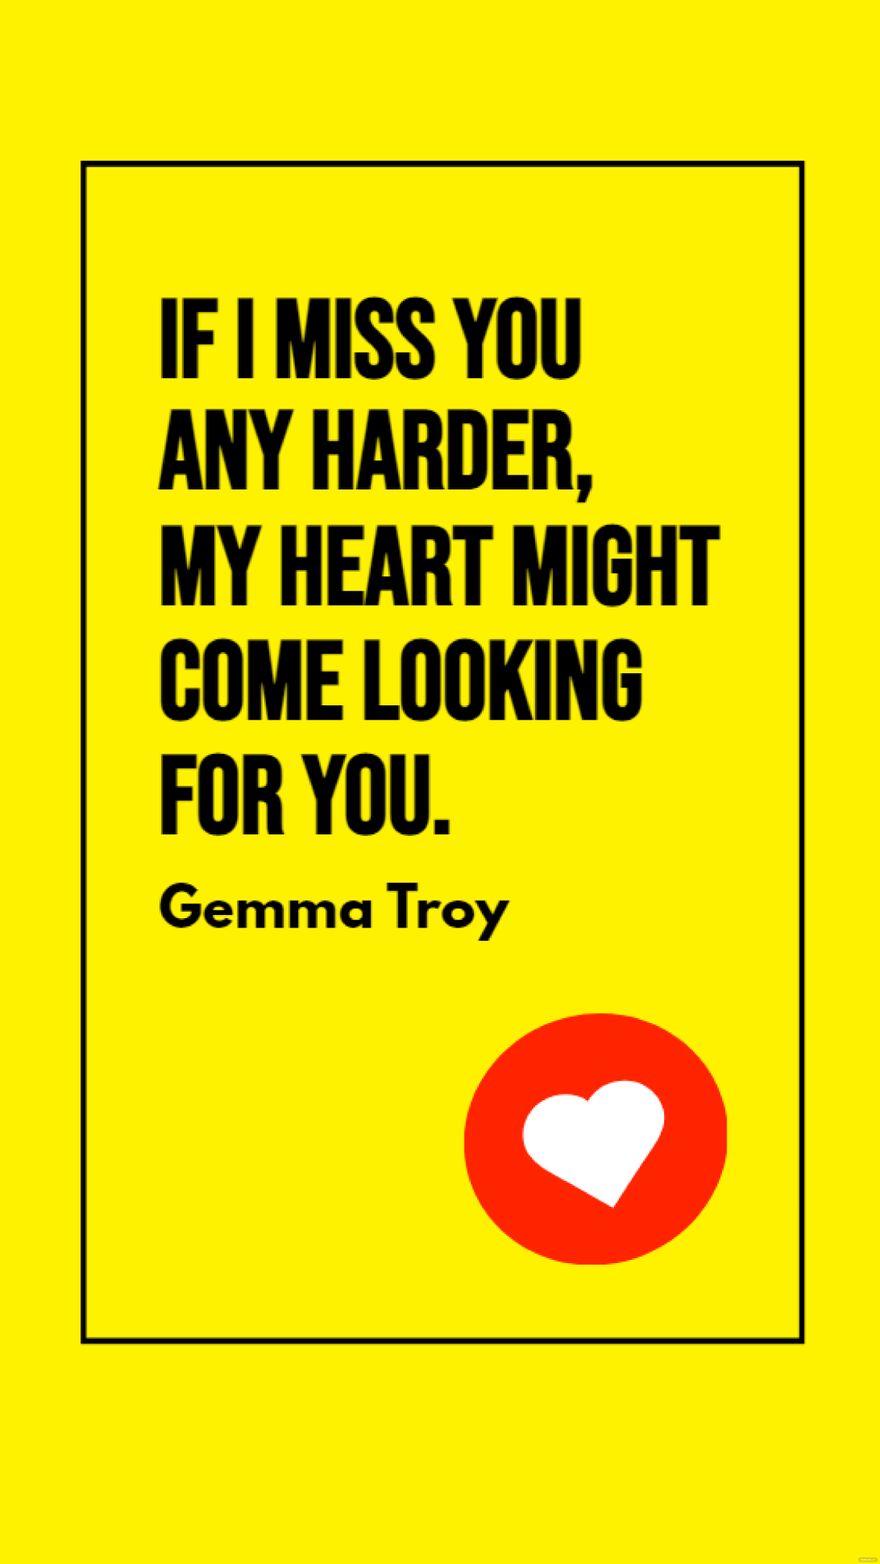 Gemma Troy - If I miss you any harder, my heart might come looking for you. in JPG